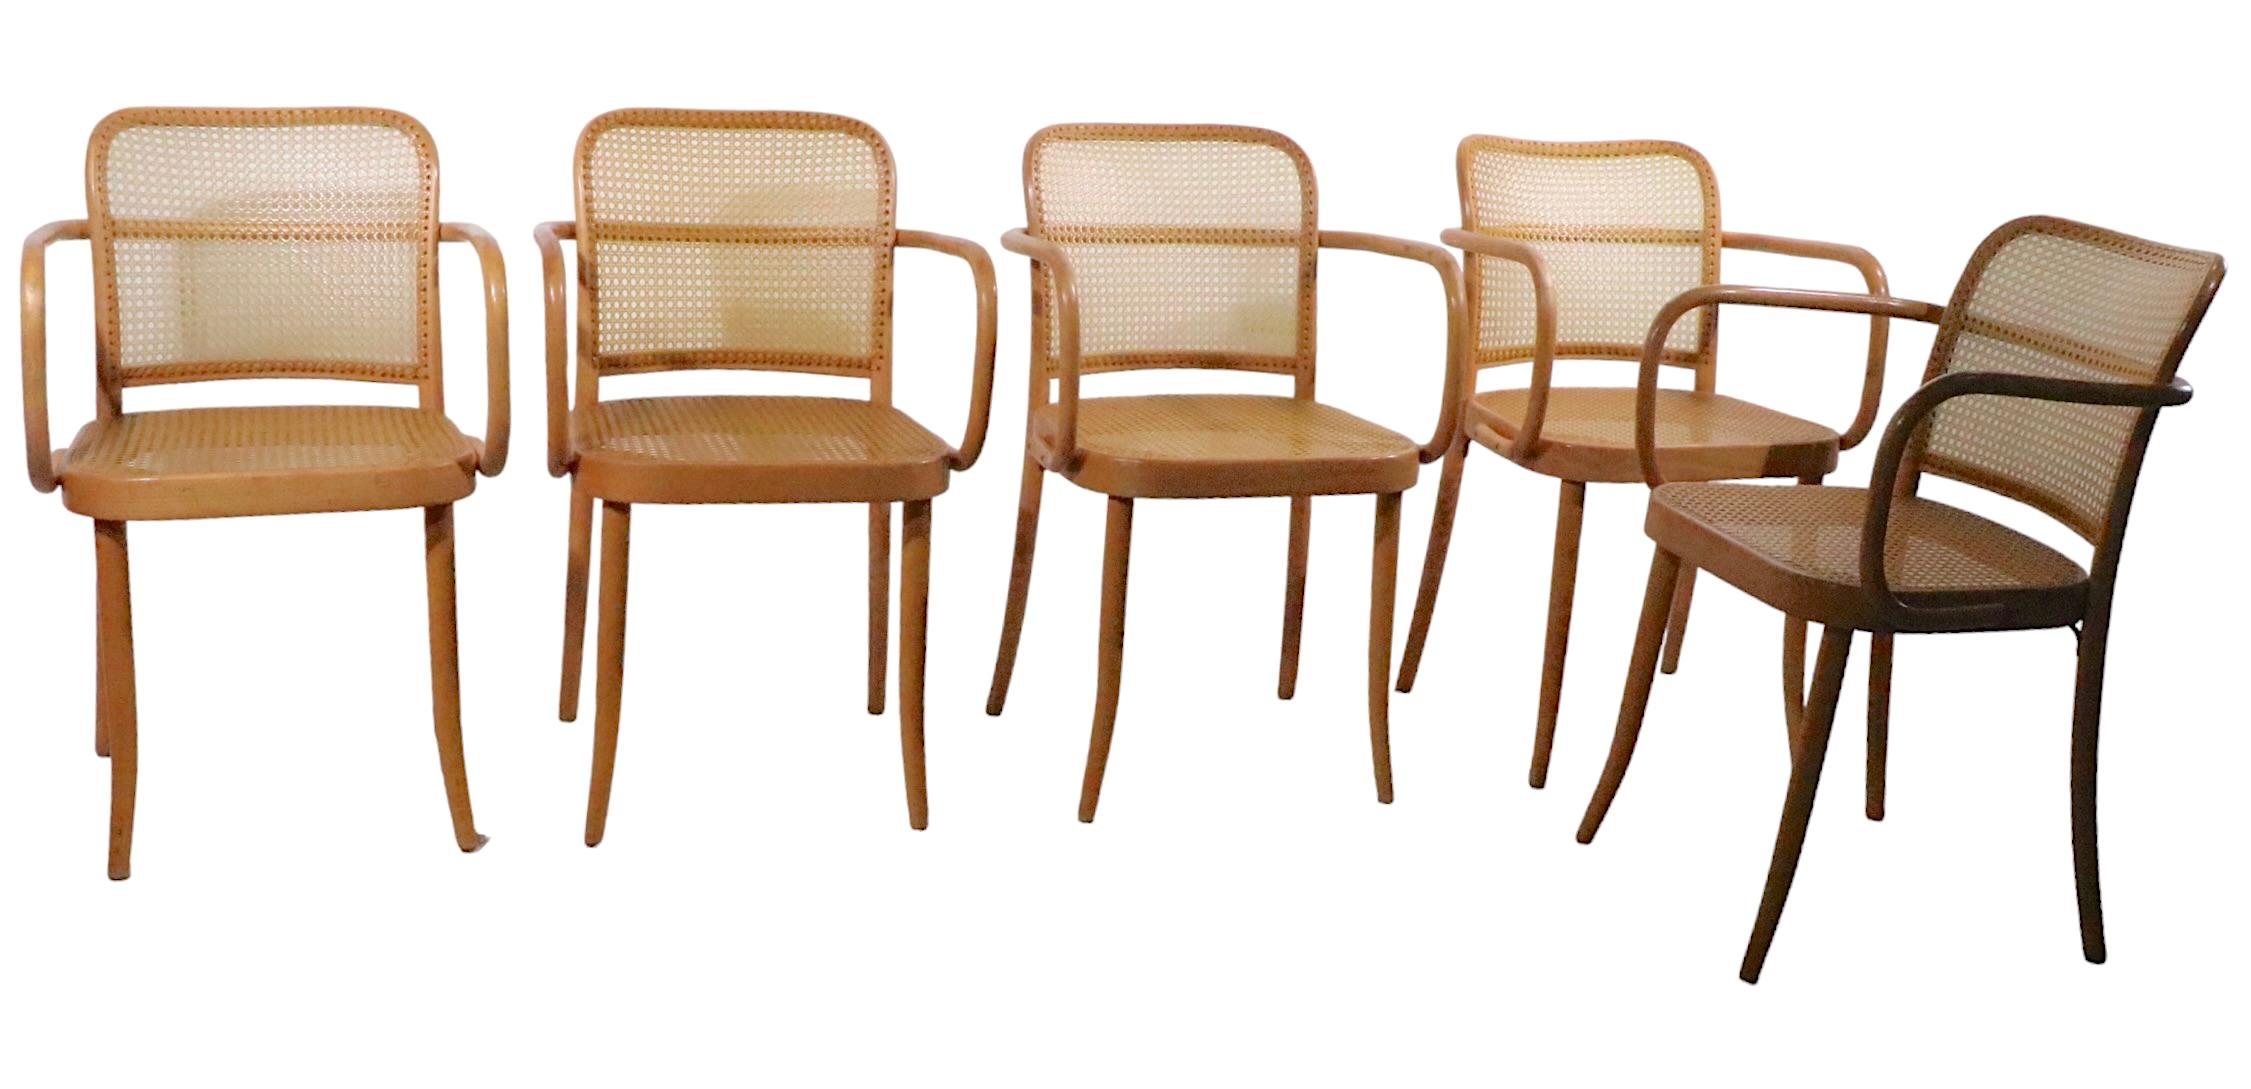 Exceptional set of five bentwood armchairs design attributed to Josef Frank, marked Made in Czechoslovakia. The chairs are constructed of steam bent wood, probably beech, and nylon, circa 1970's. A Mid 20th C version of the early 20th C Frank design